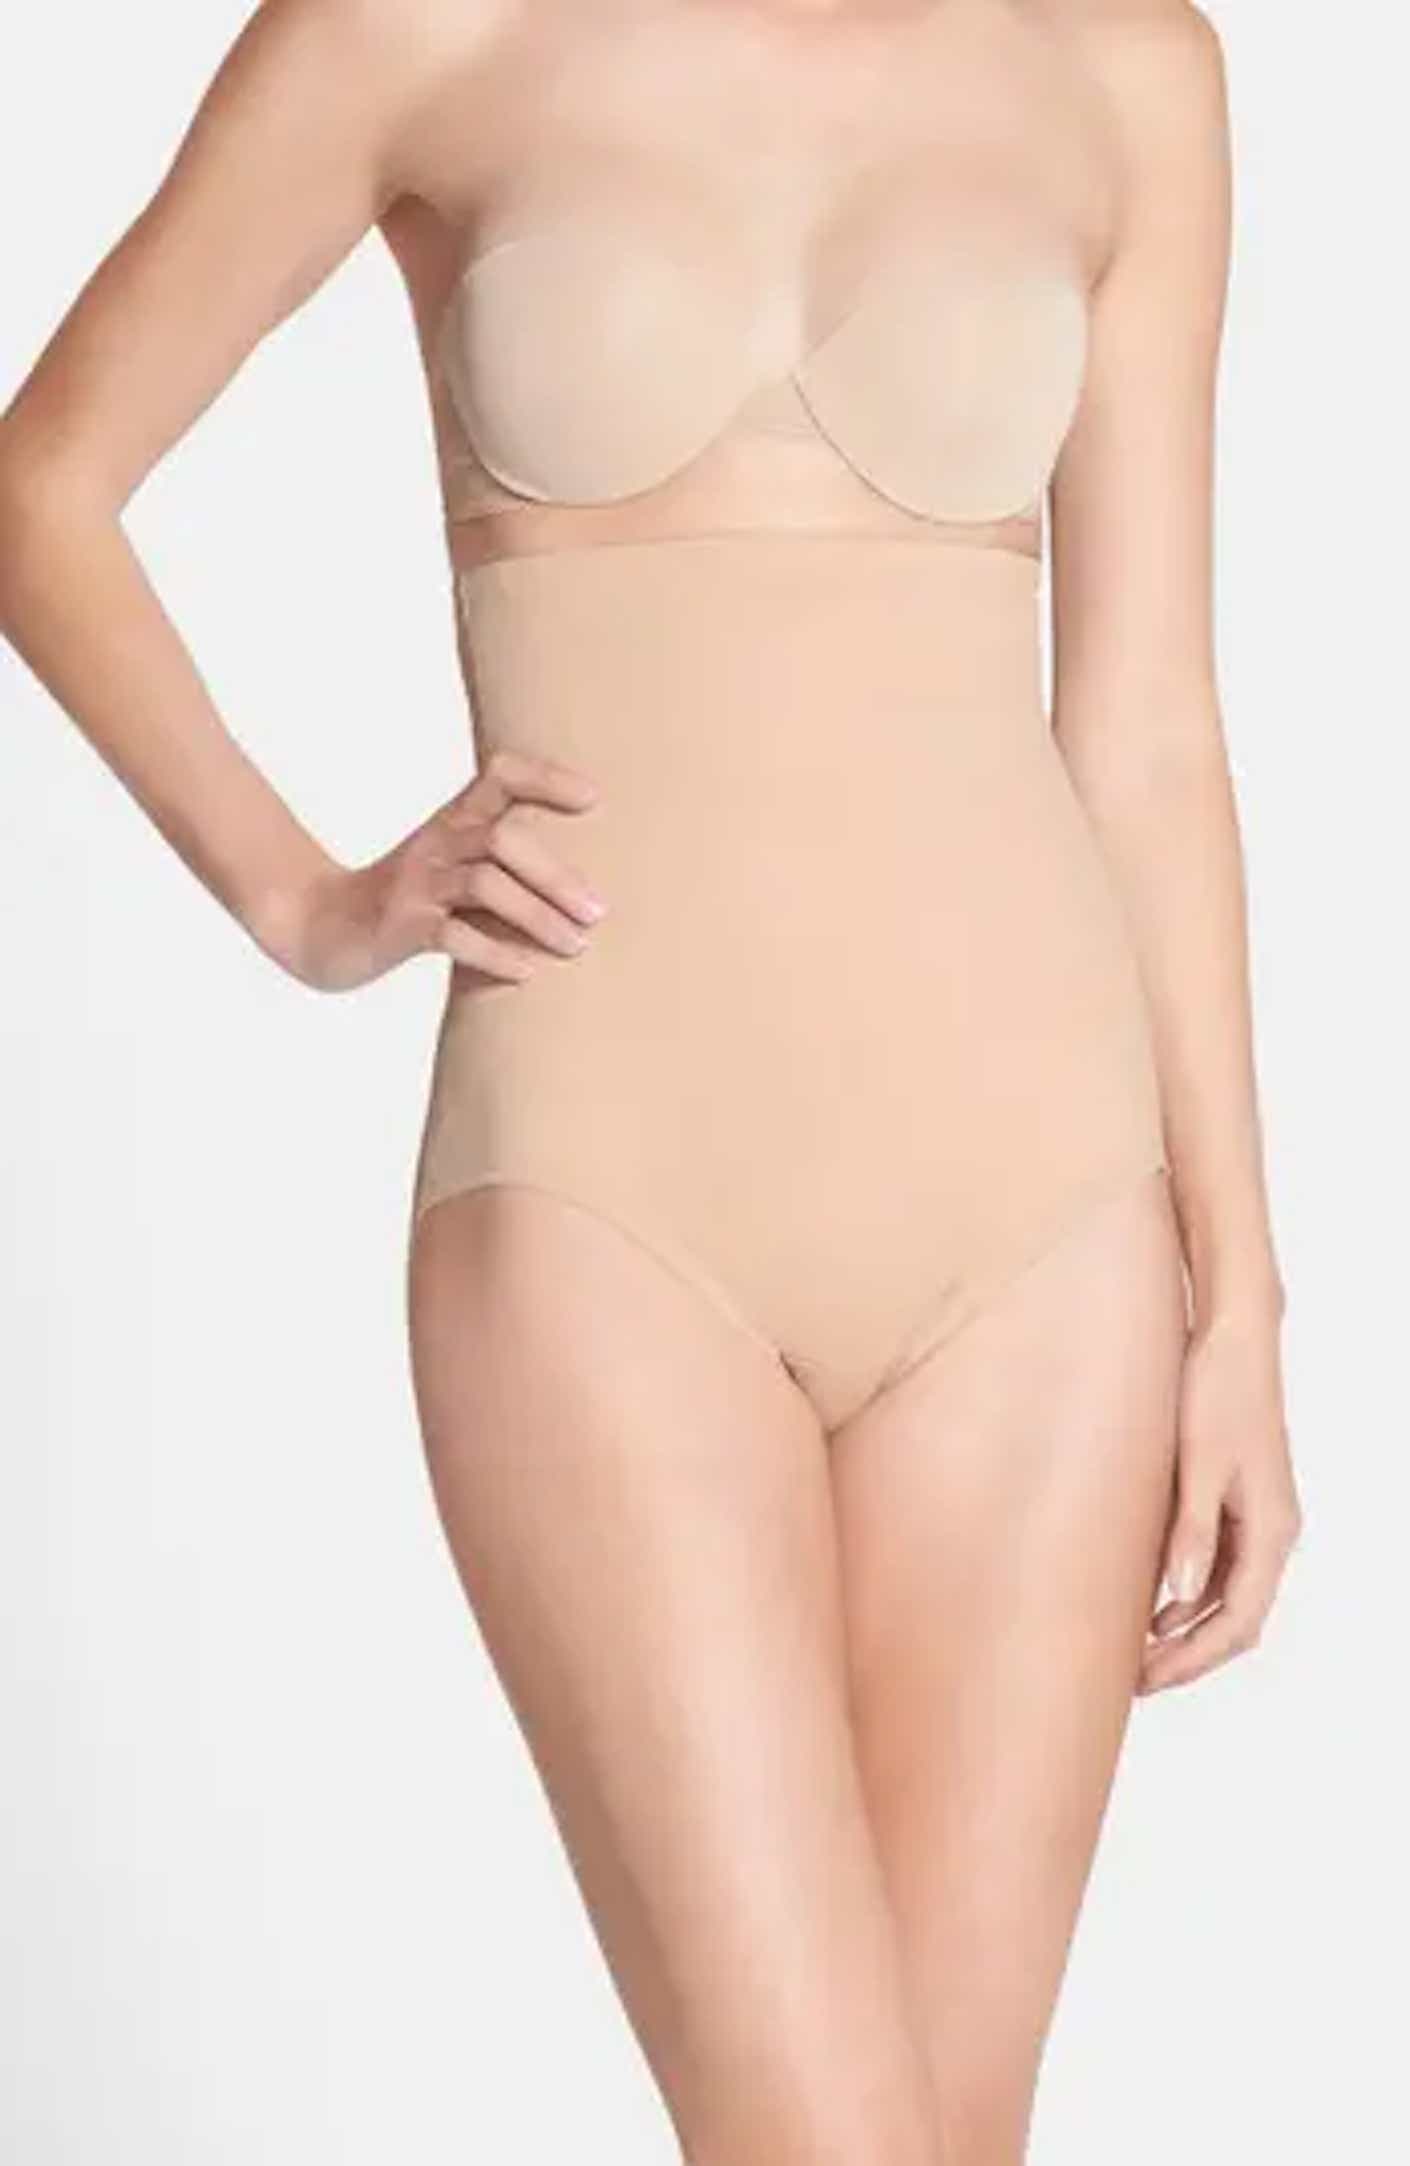 Here at Pinsy Shapewear we want you to feel beautiful and confident in